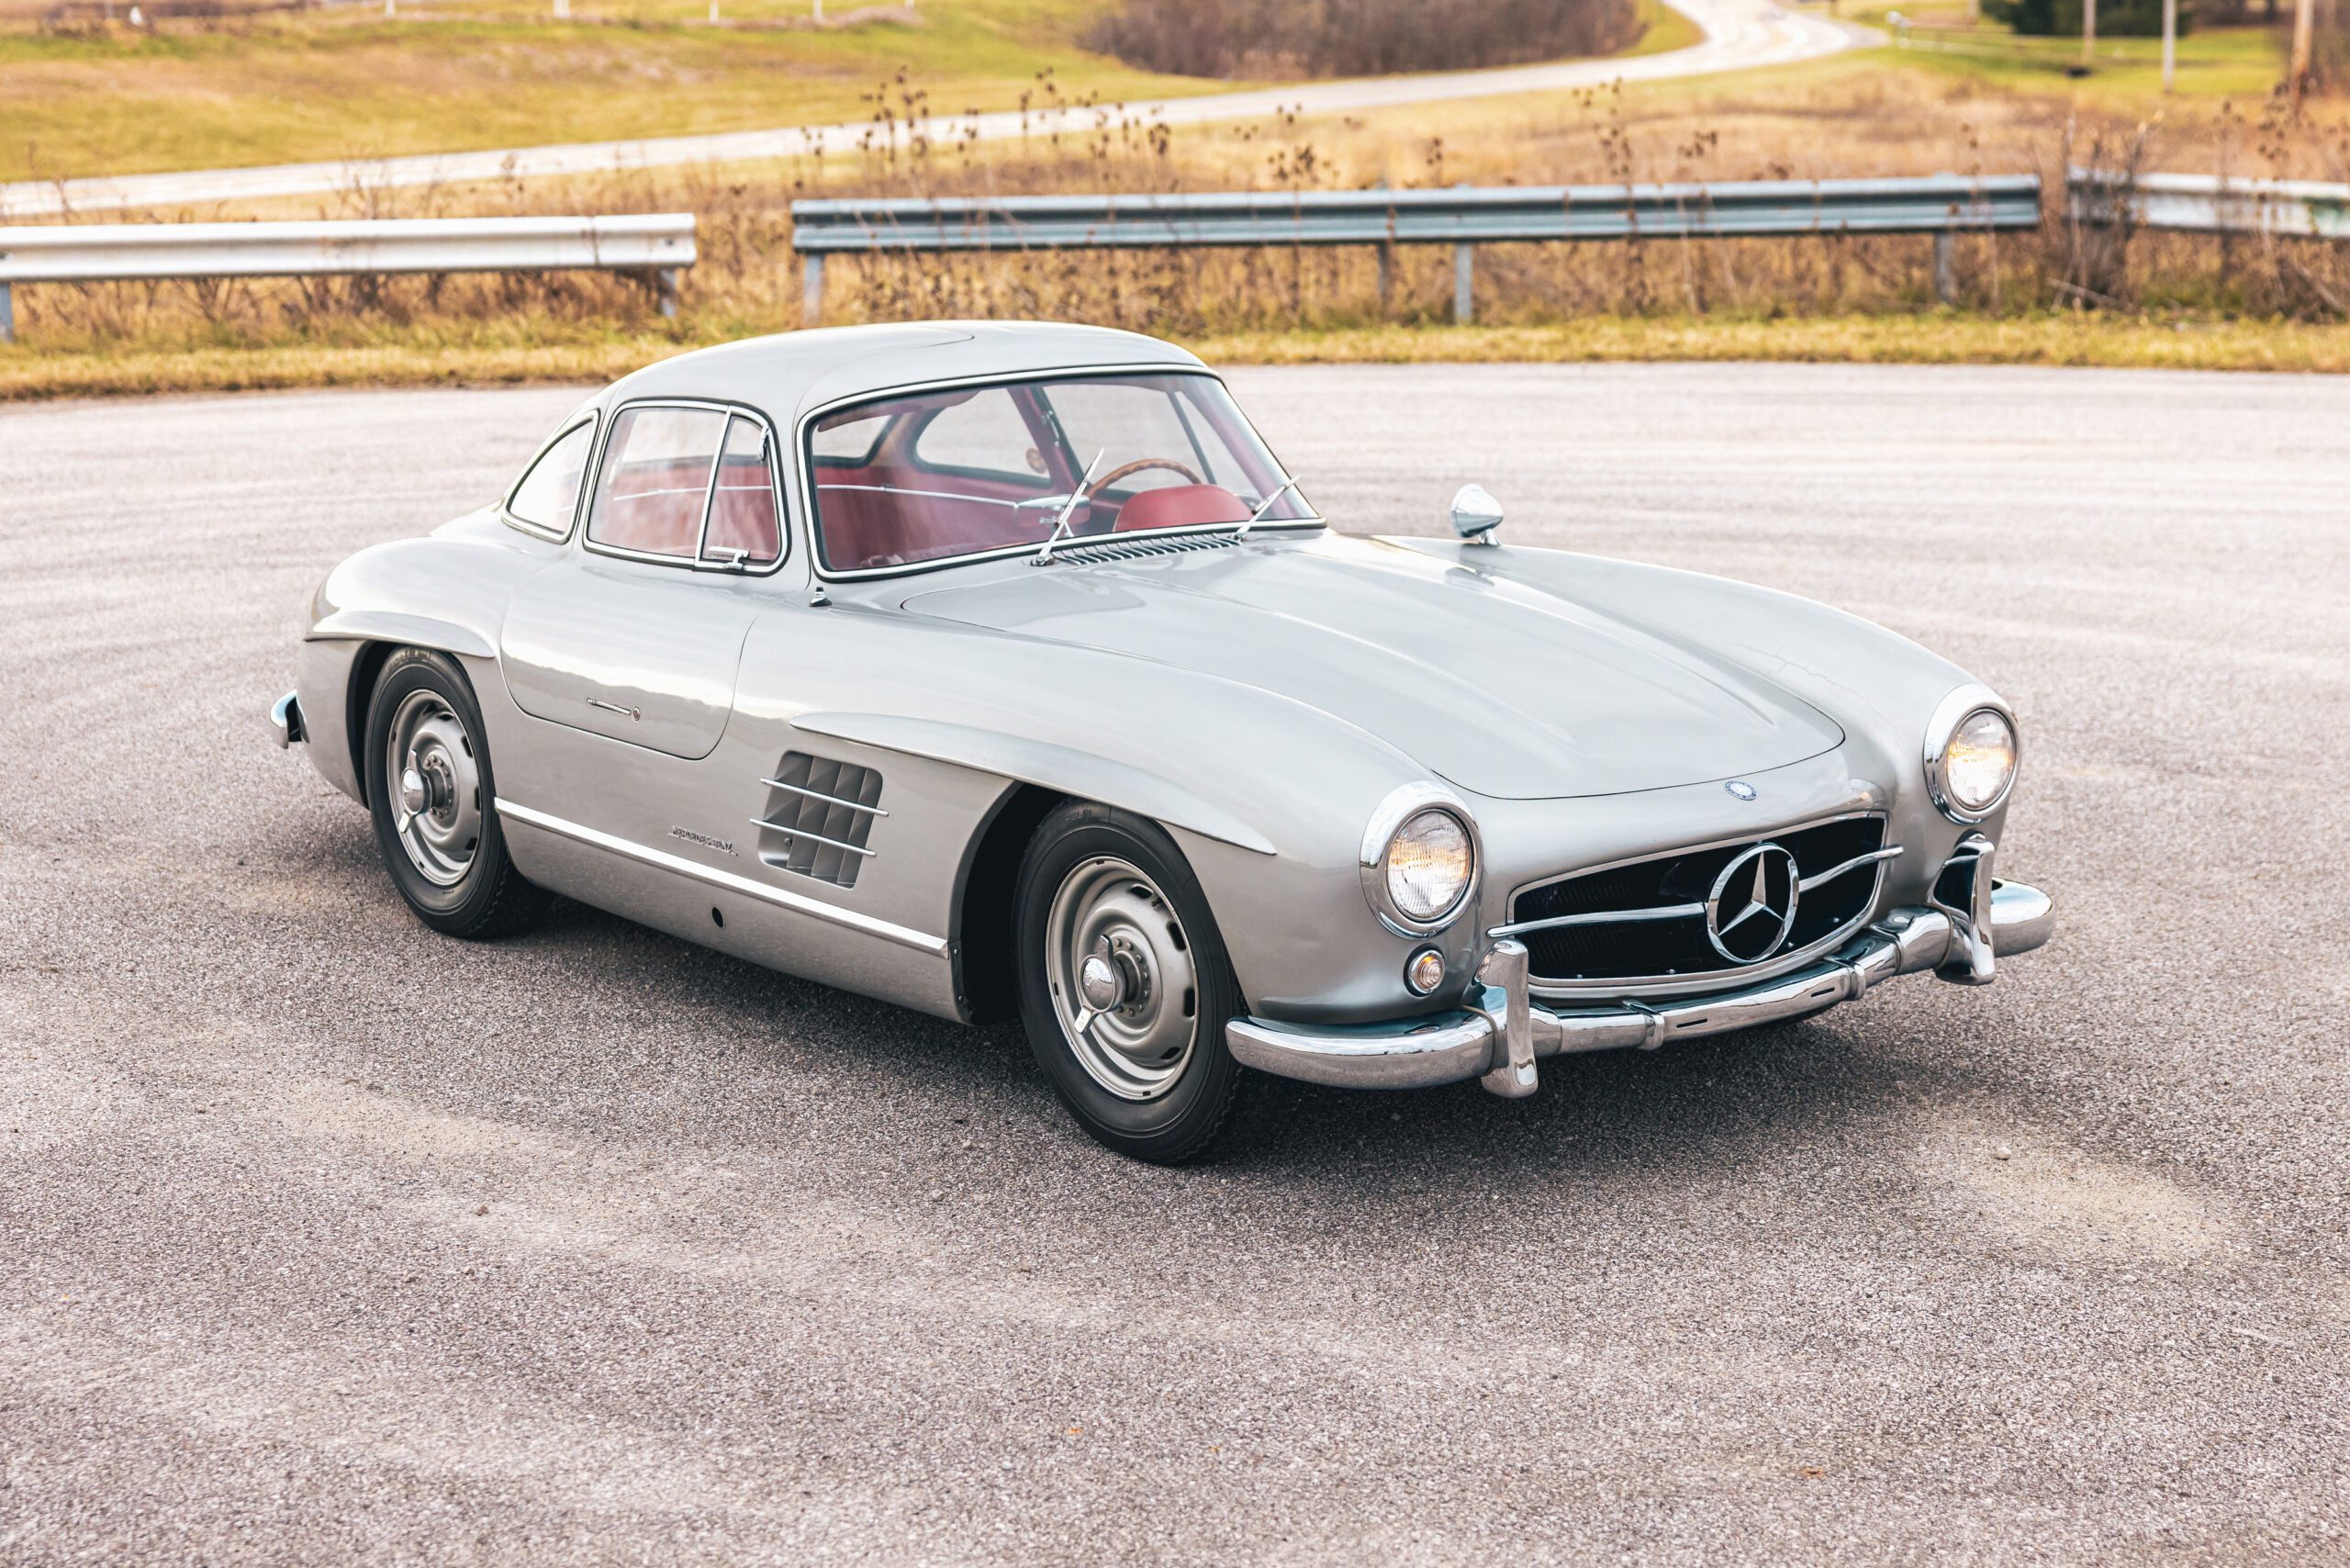 1955 Mercedes-Benz 300 SL Gullwing Theodore W. Pieper ©2023 Courtesy of RM Sotheby's